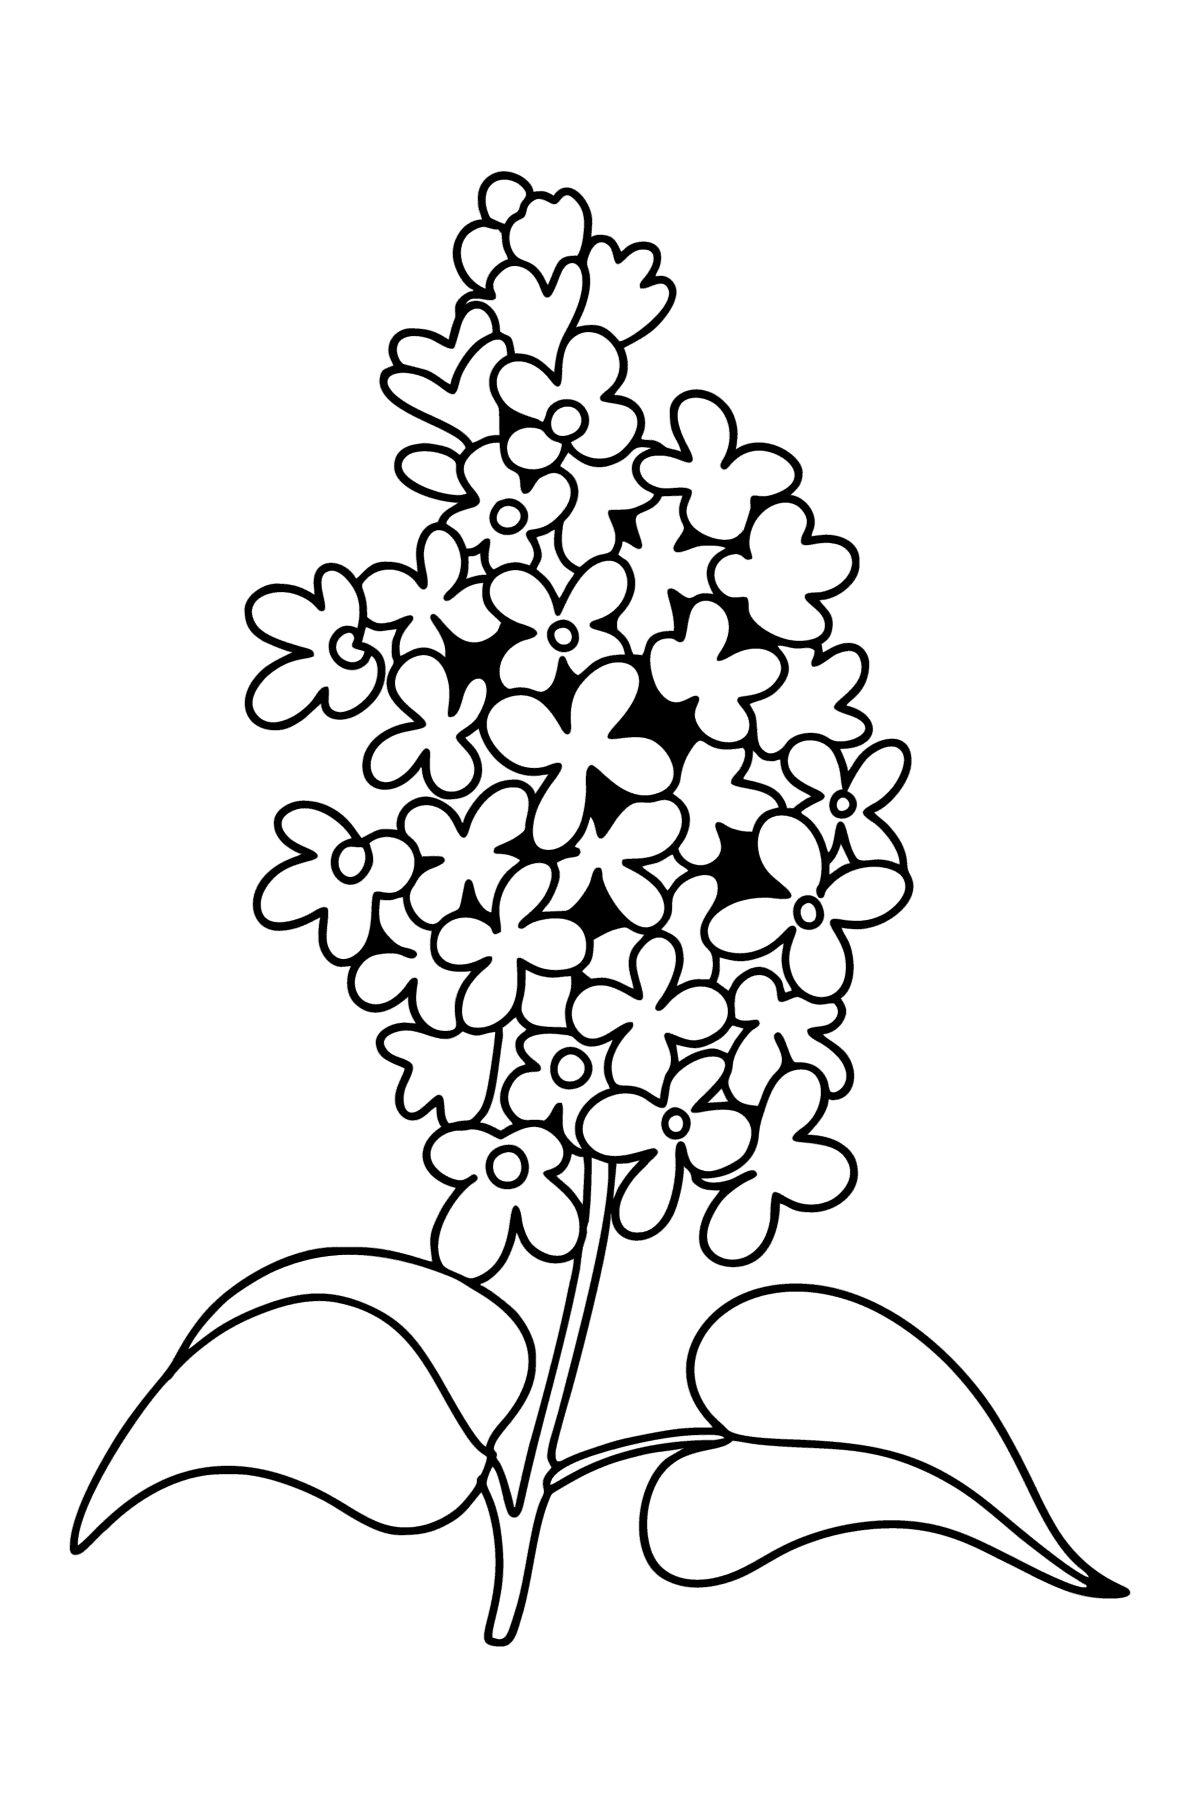 Lilac sprig coloring page - Coloring Pages for Kids